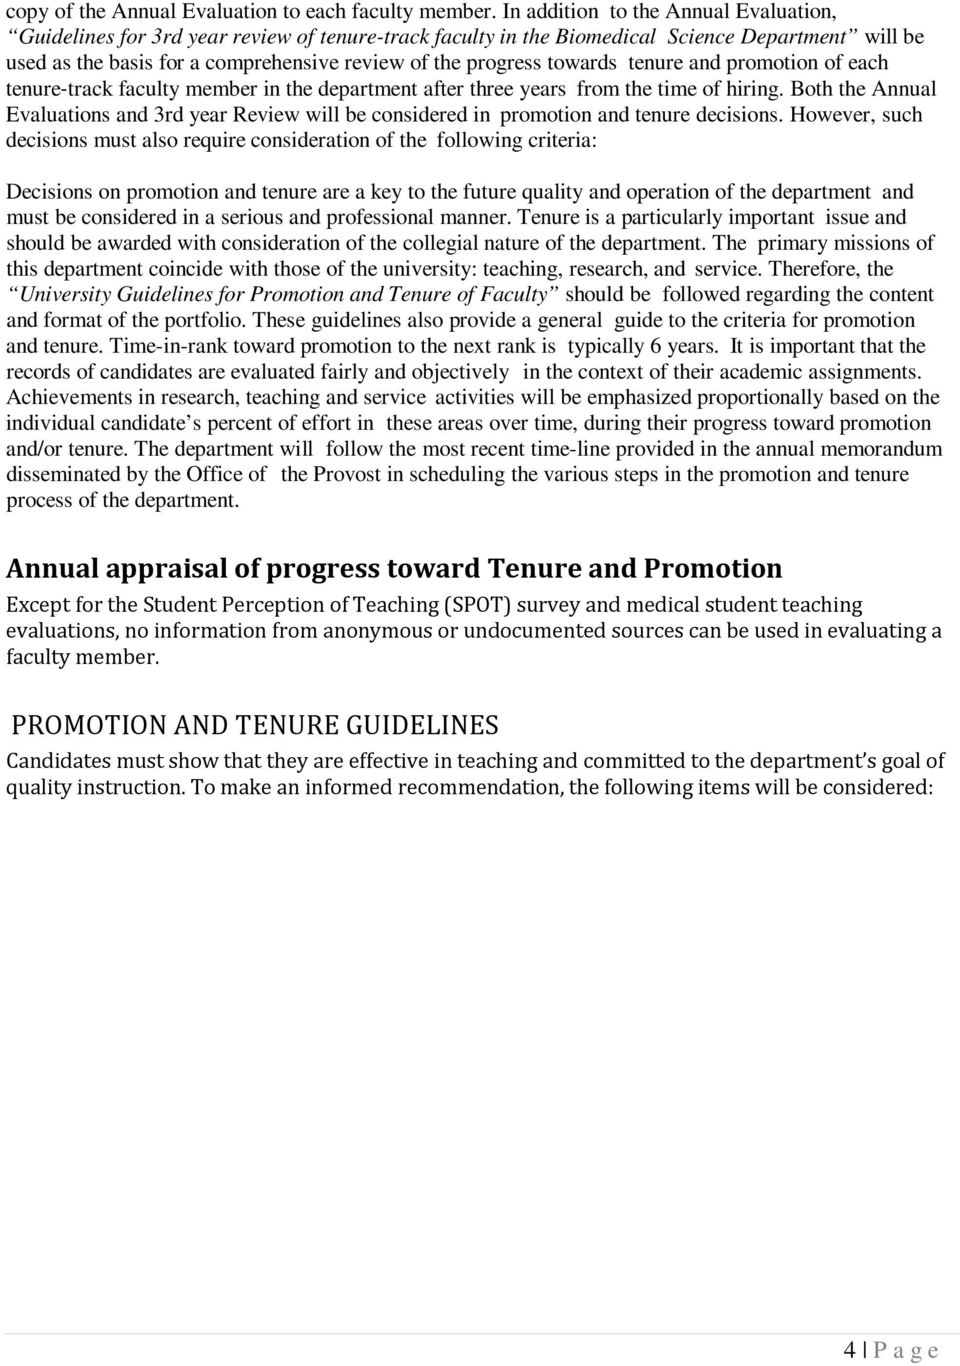 towards tenure and promotion of each tenure track faculty member in the department after three years from the time of hiring.